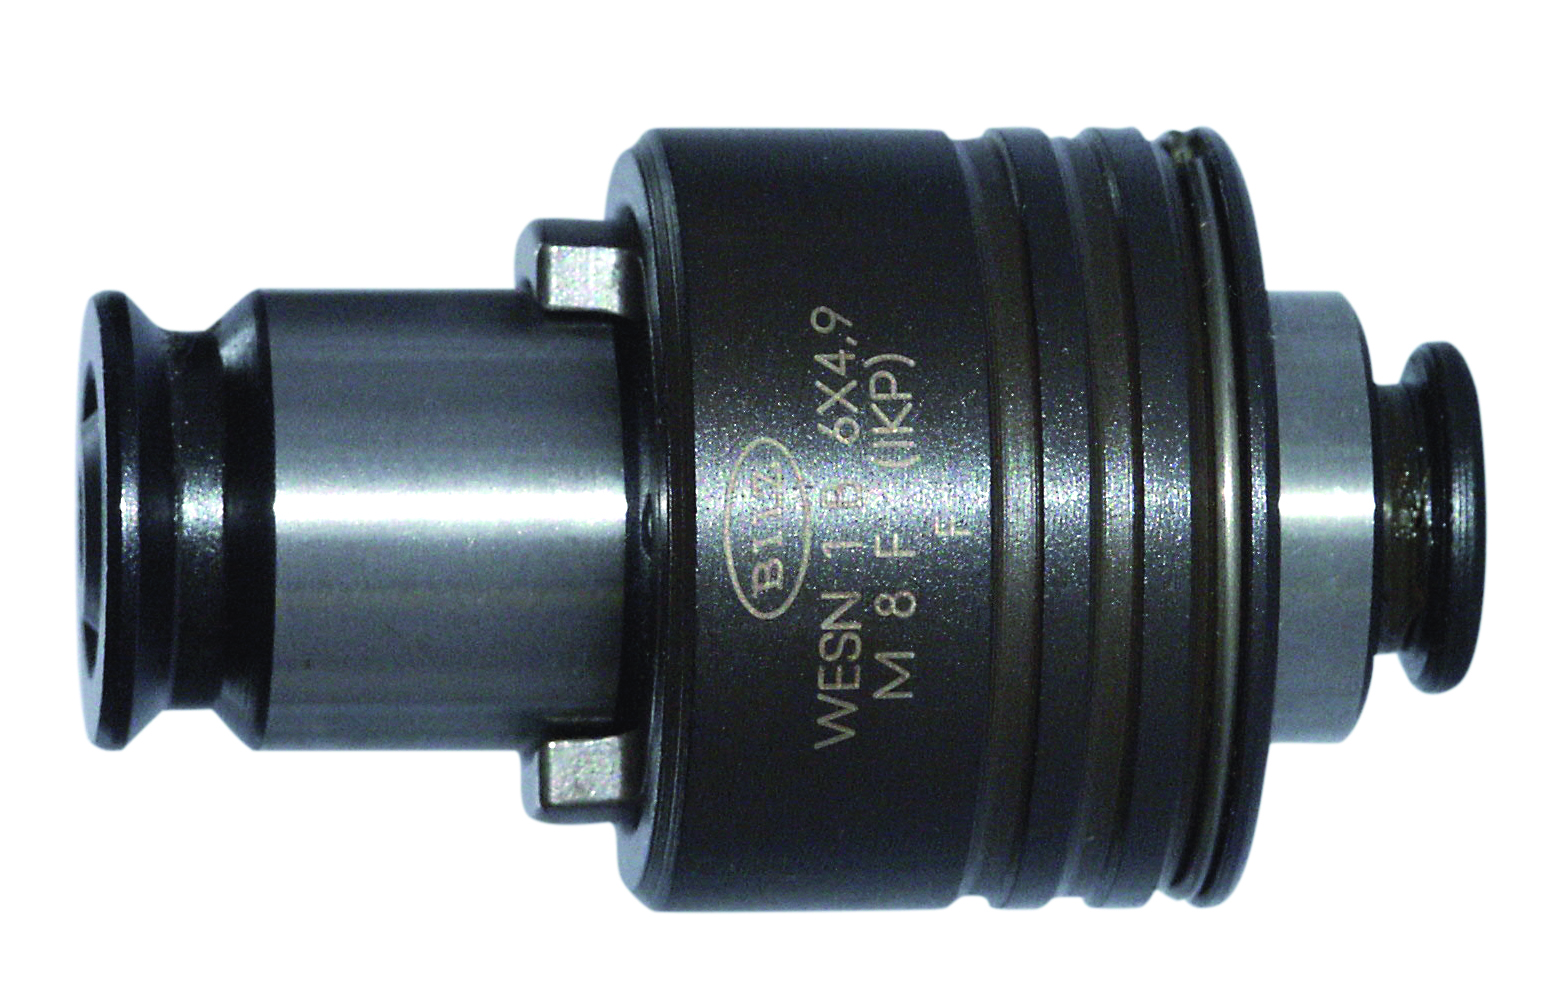 Details about   Bilz Type TAP ADAPTER 